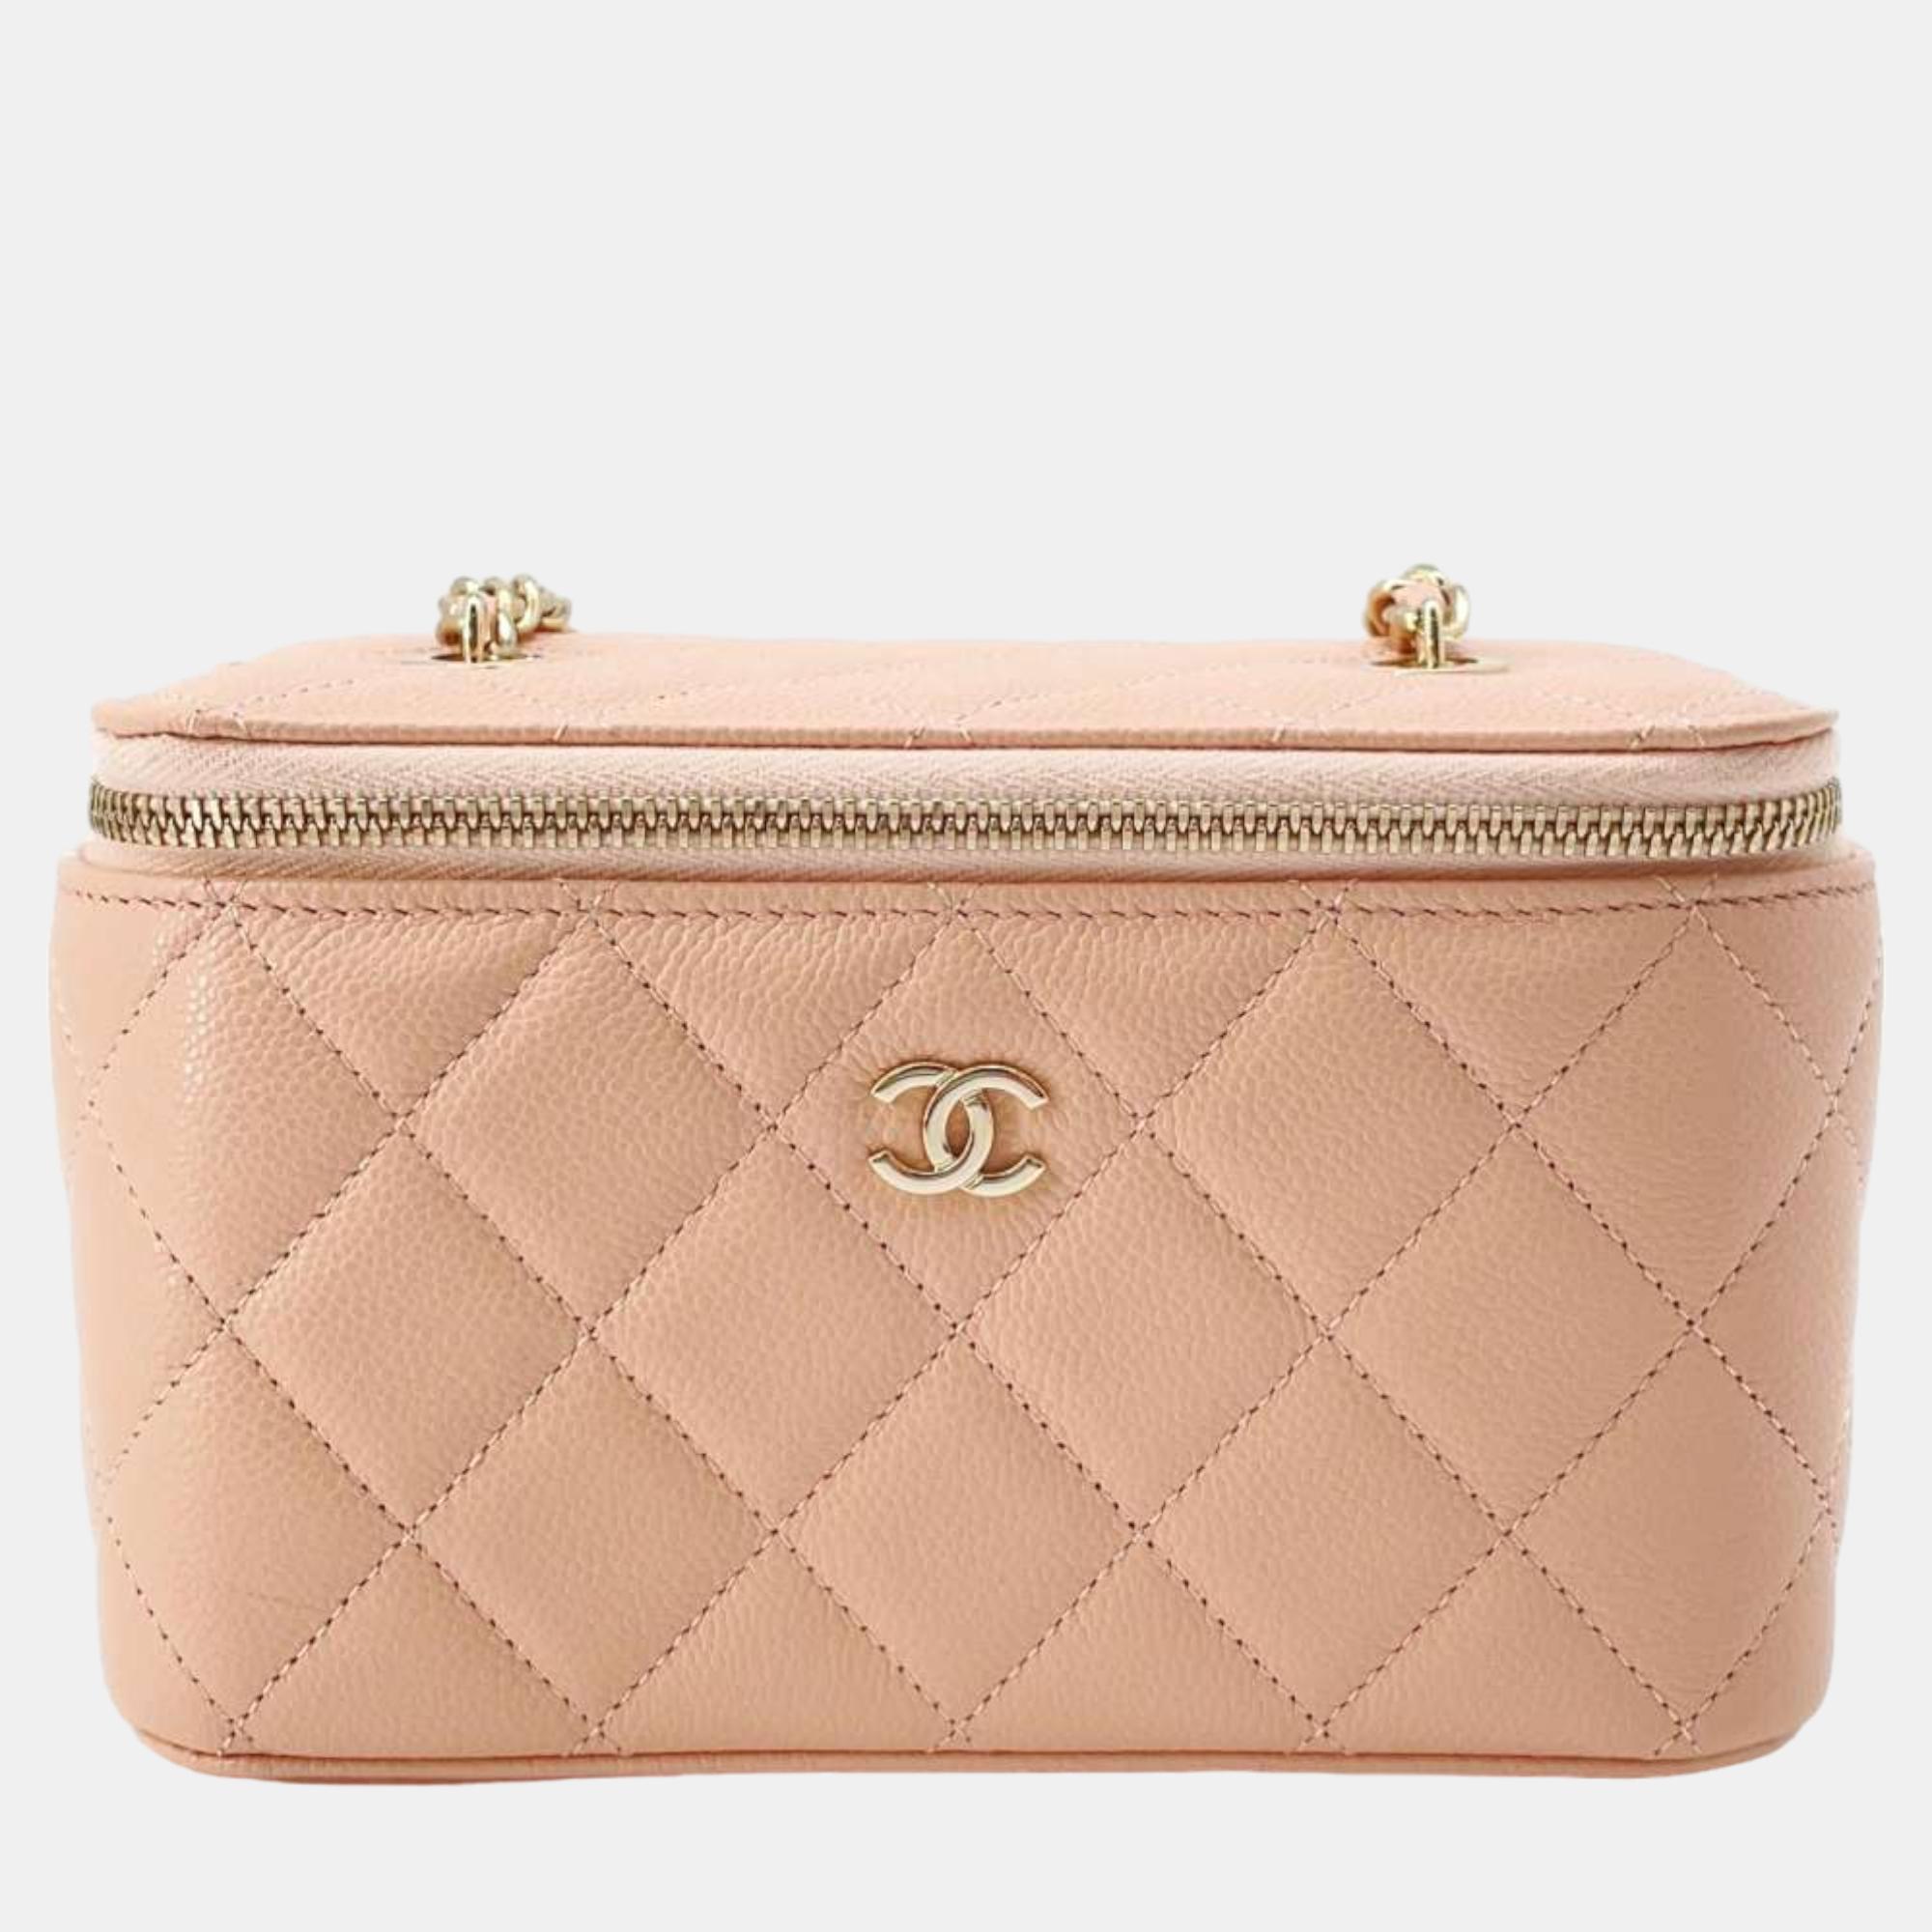 Chanel pink caviar leather chain vanity bag